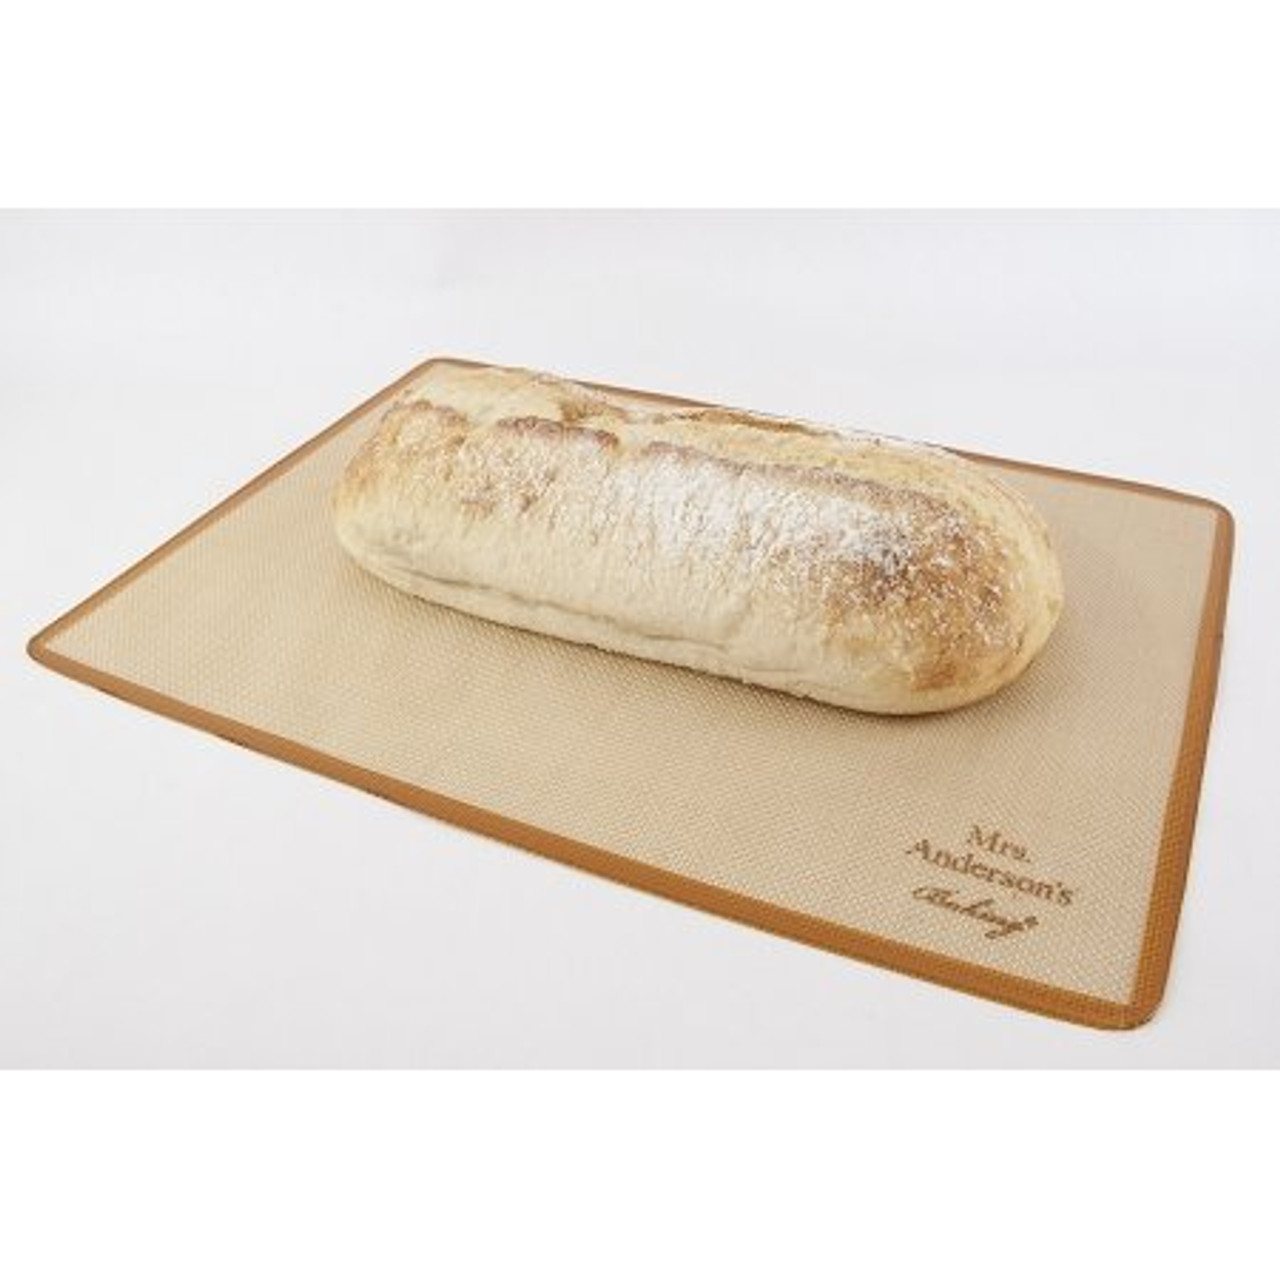 Mrs. Anderson's Baking U.S. Half Size Silicone Baking Mat (HIC 60001)